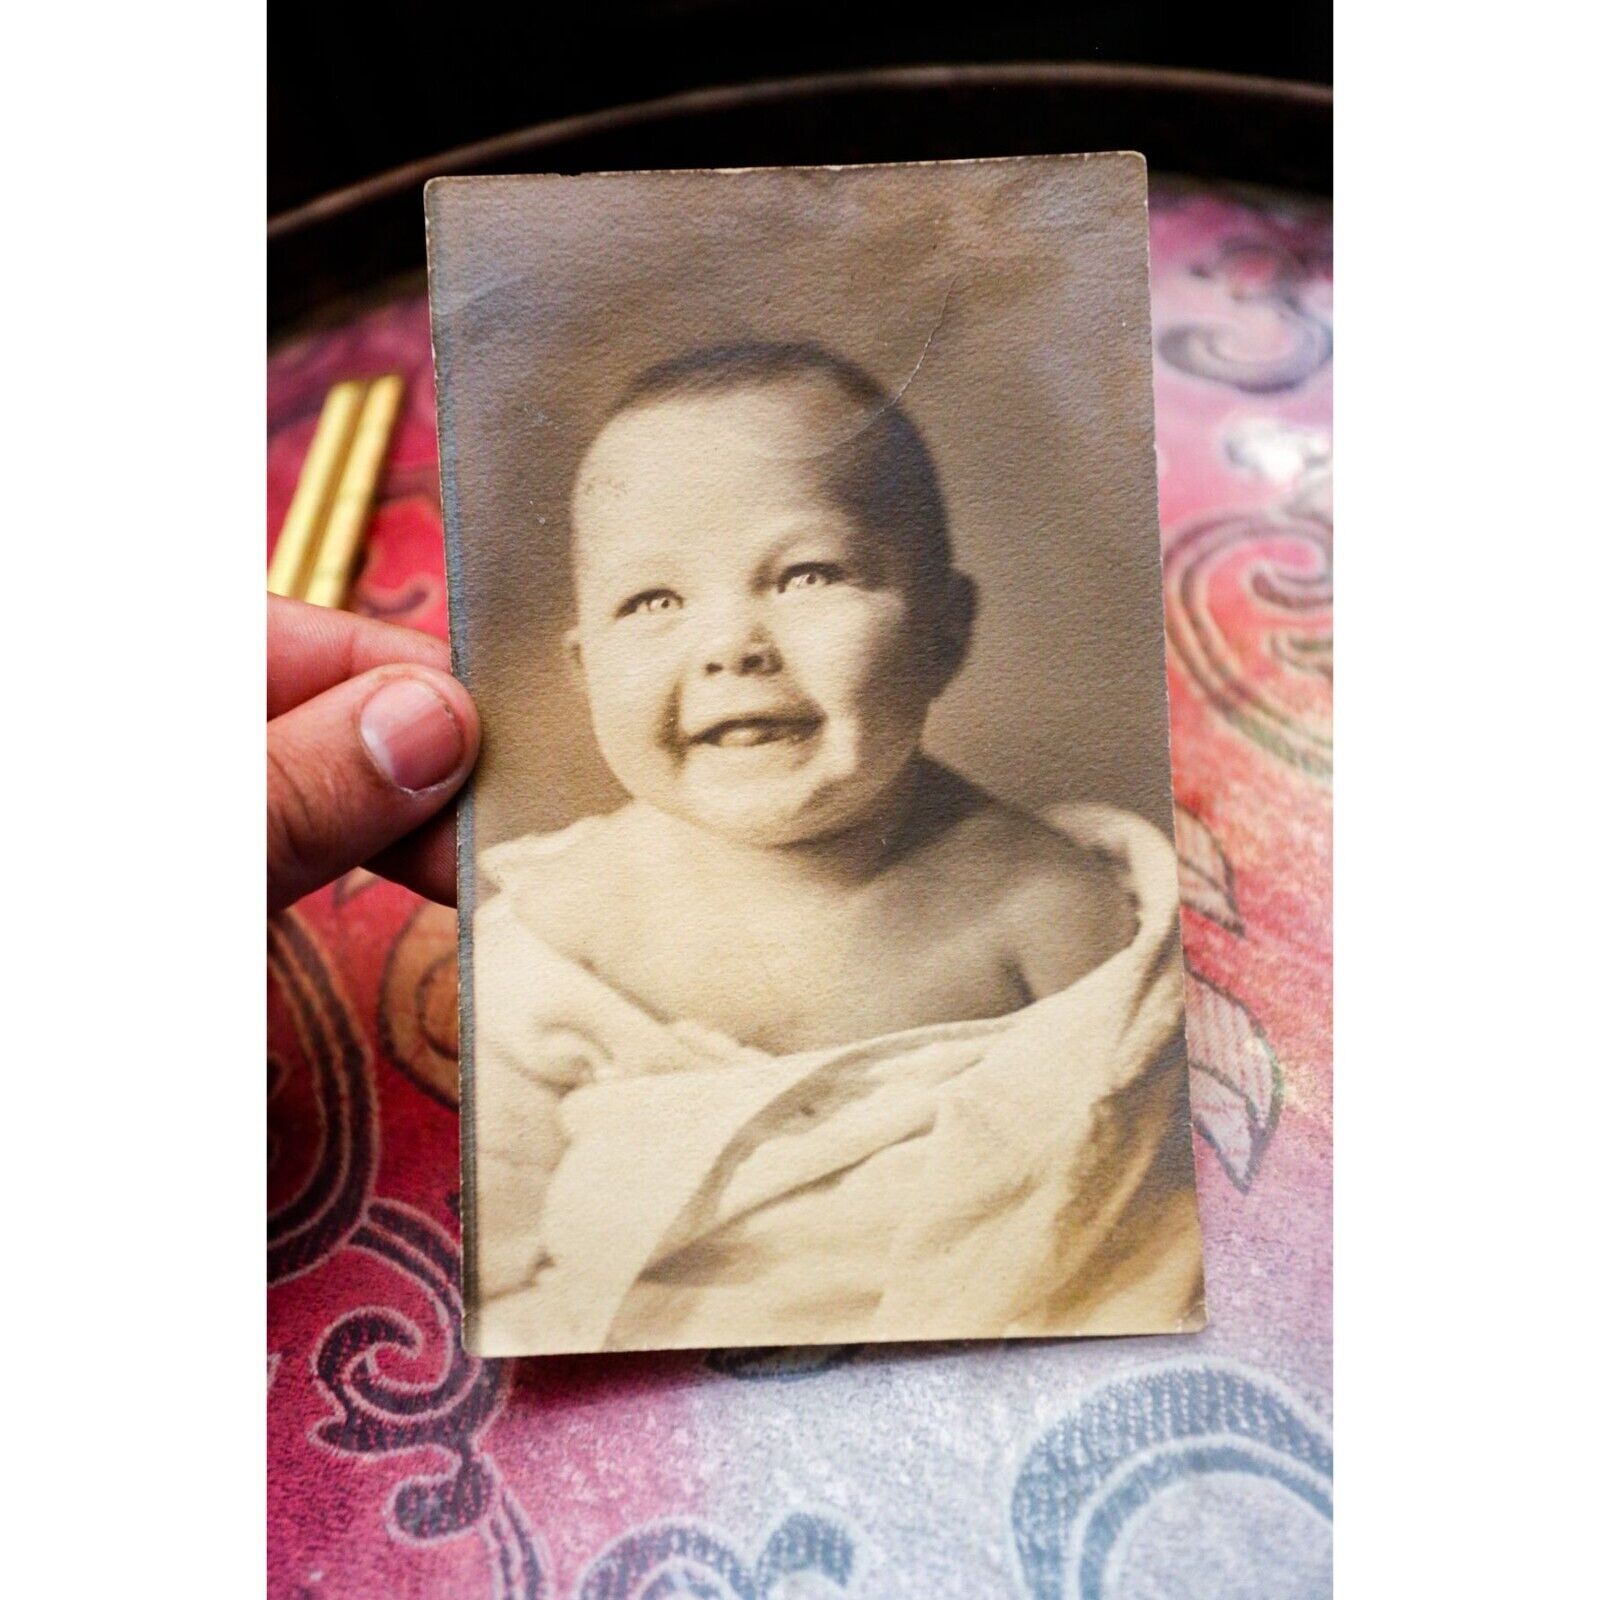 Beautiful Cute Super Happy Smiling Baby Wrapped In Blanket Antique Photo